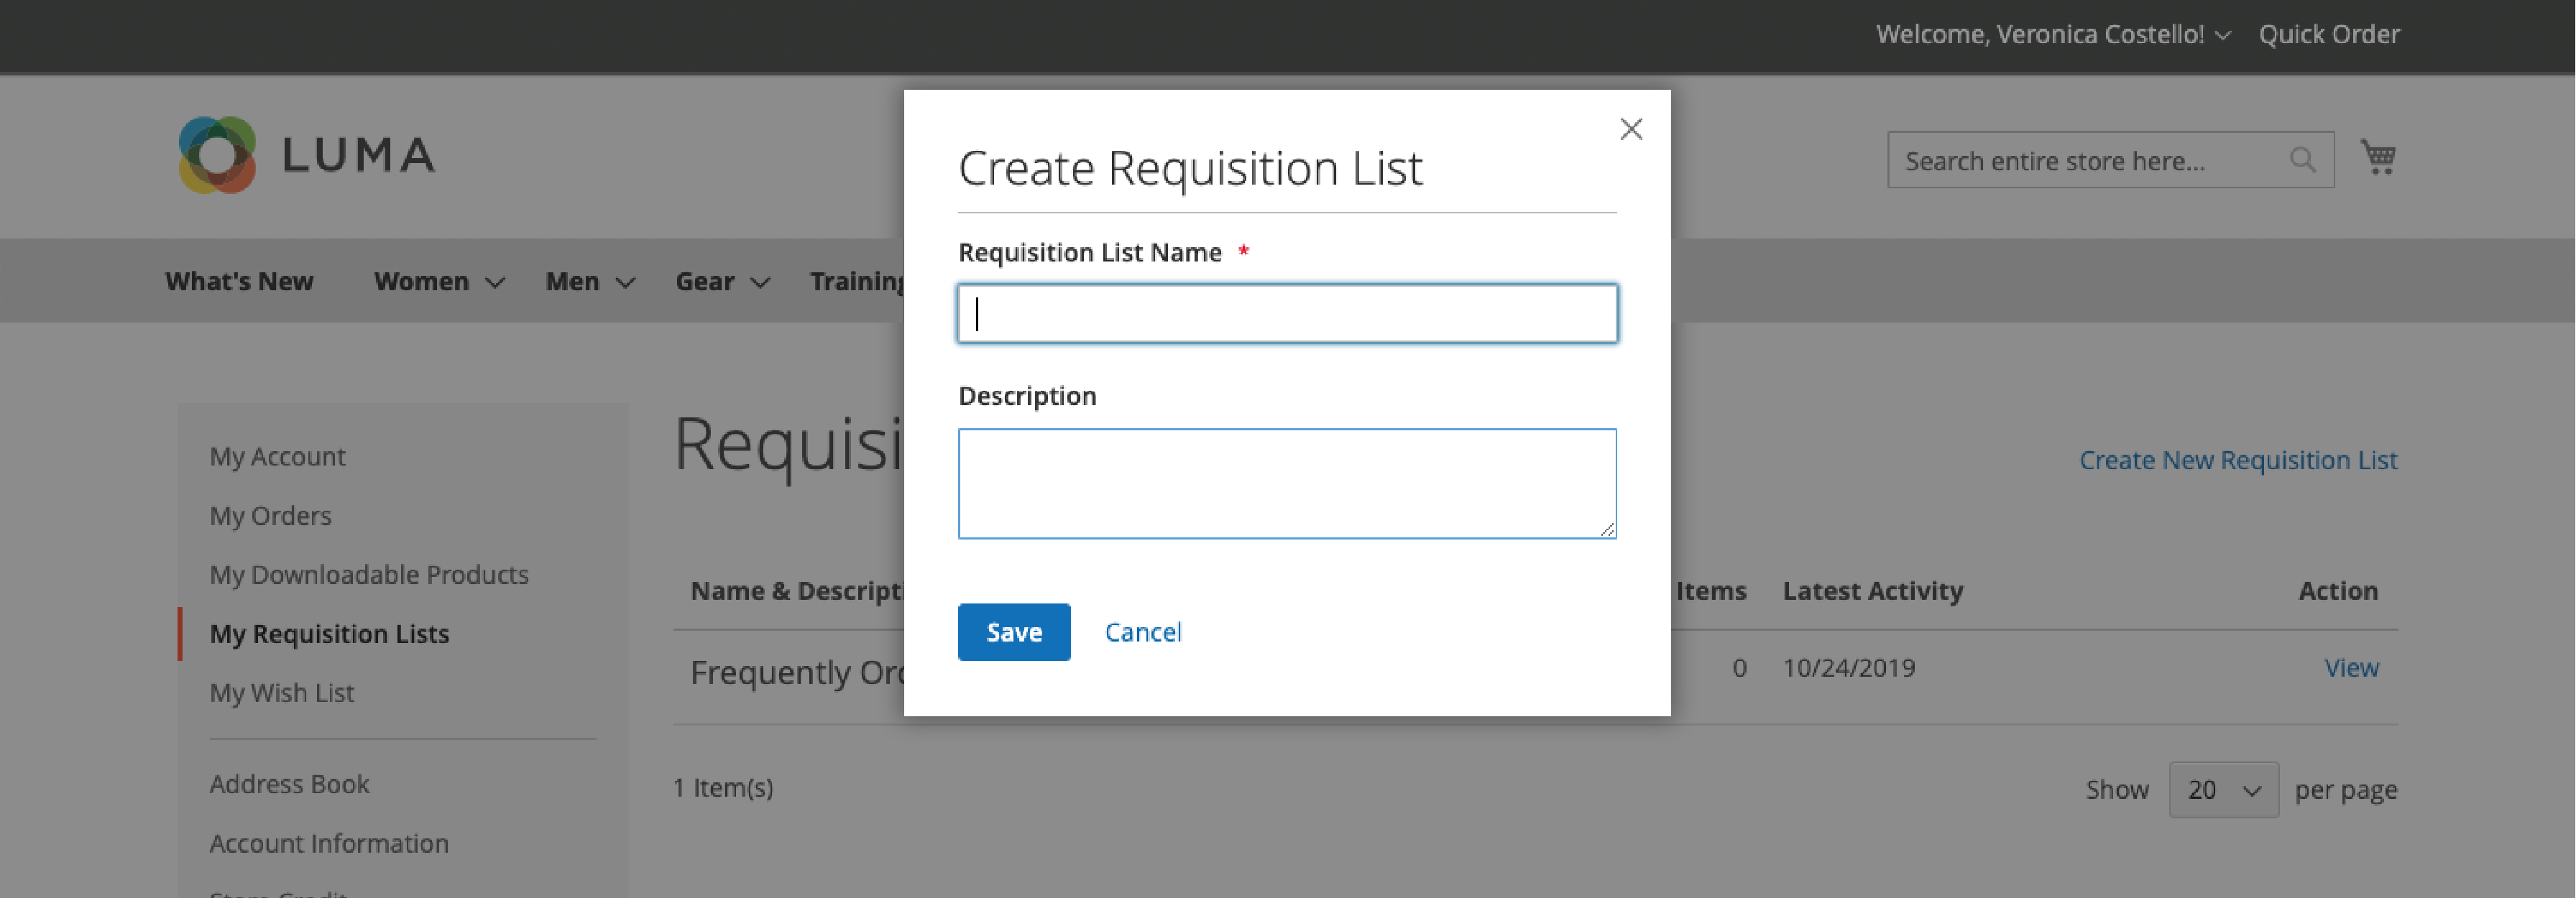 Creating a new requisition list in Magento admin panel